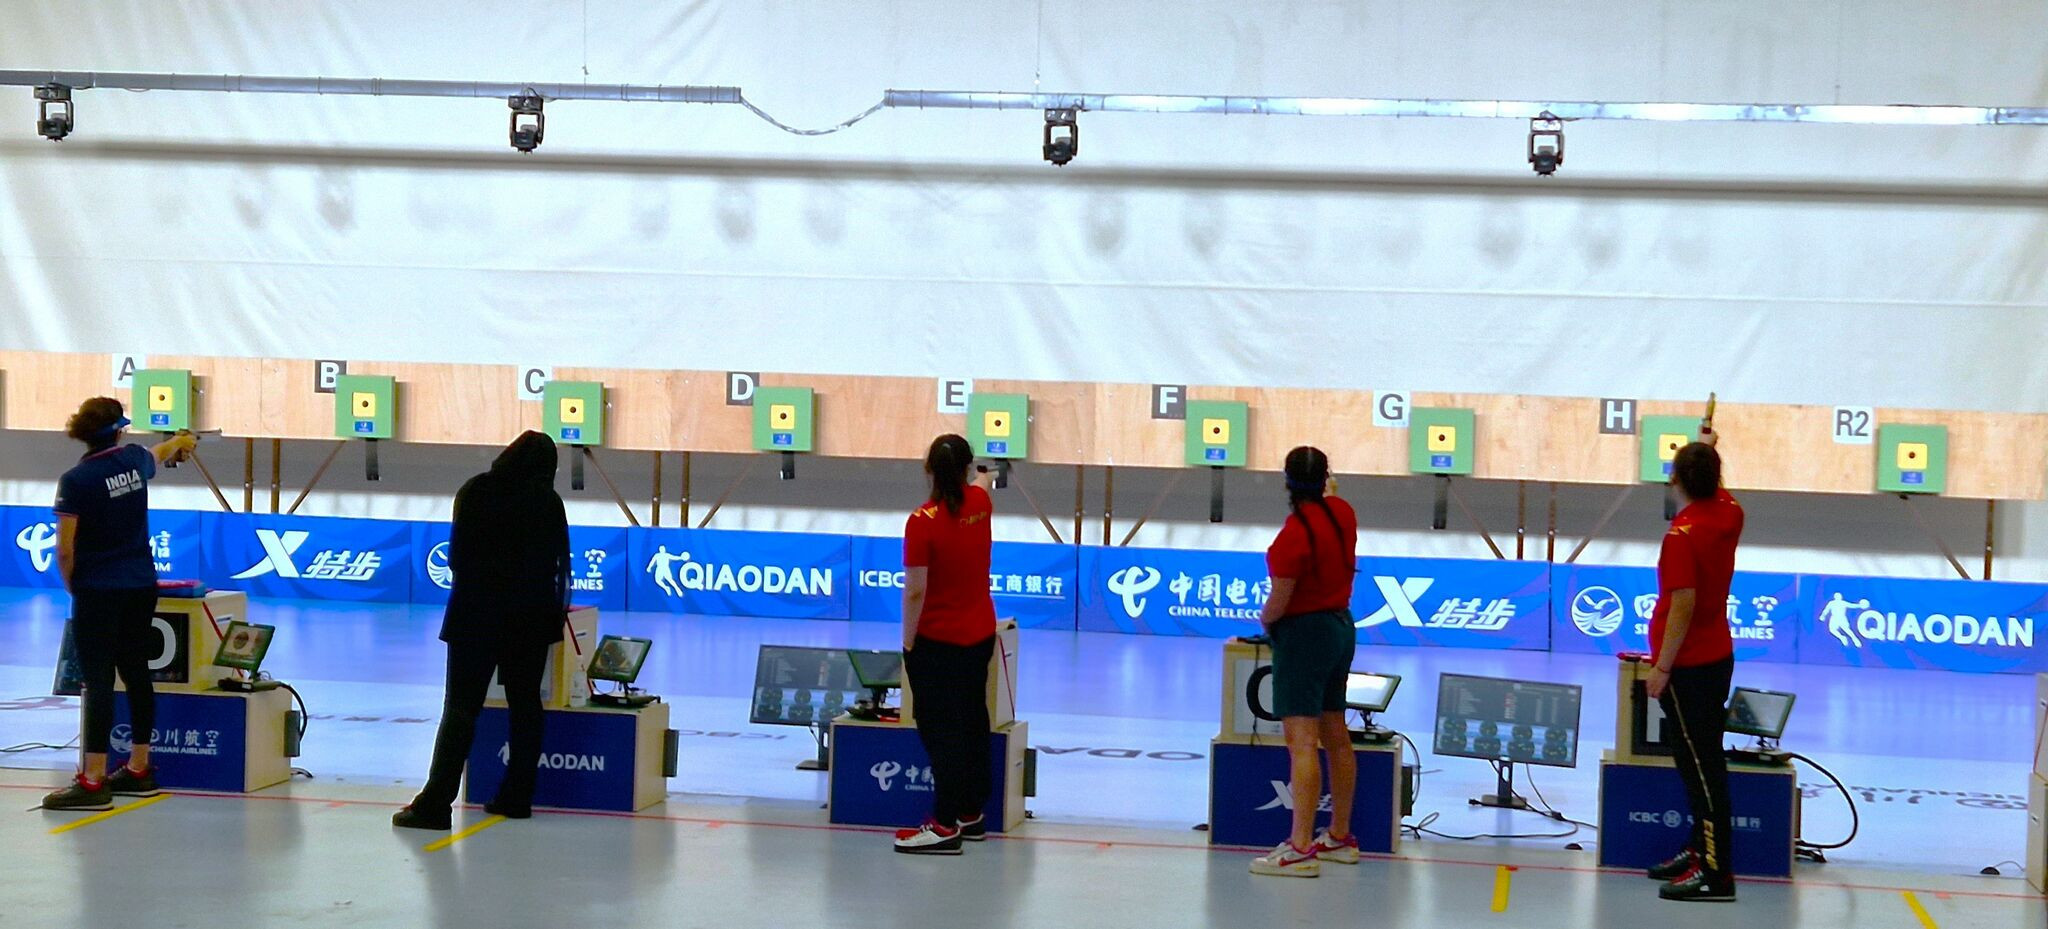 The 10 metres air pistol individual and team events were among the shooting titles decided at the Chengdu Shooting Sport School ©FISU